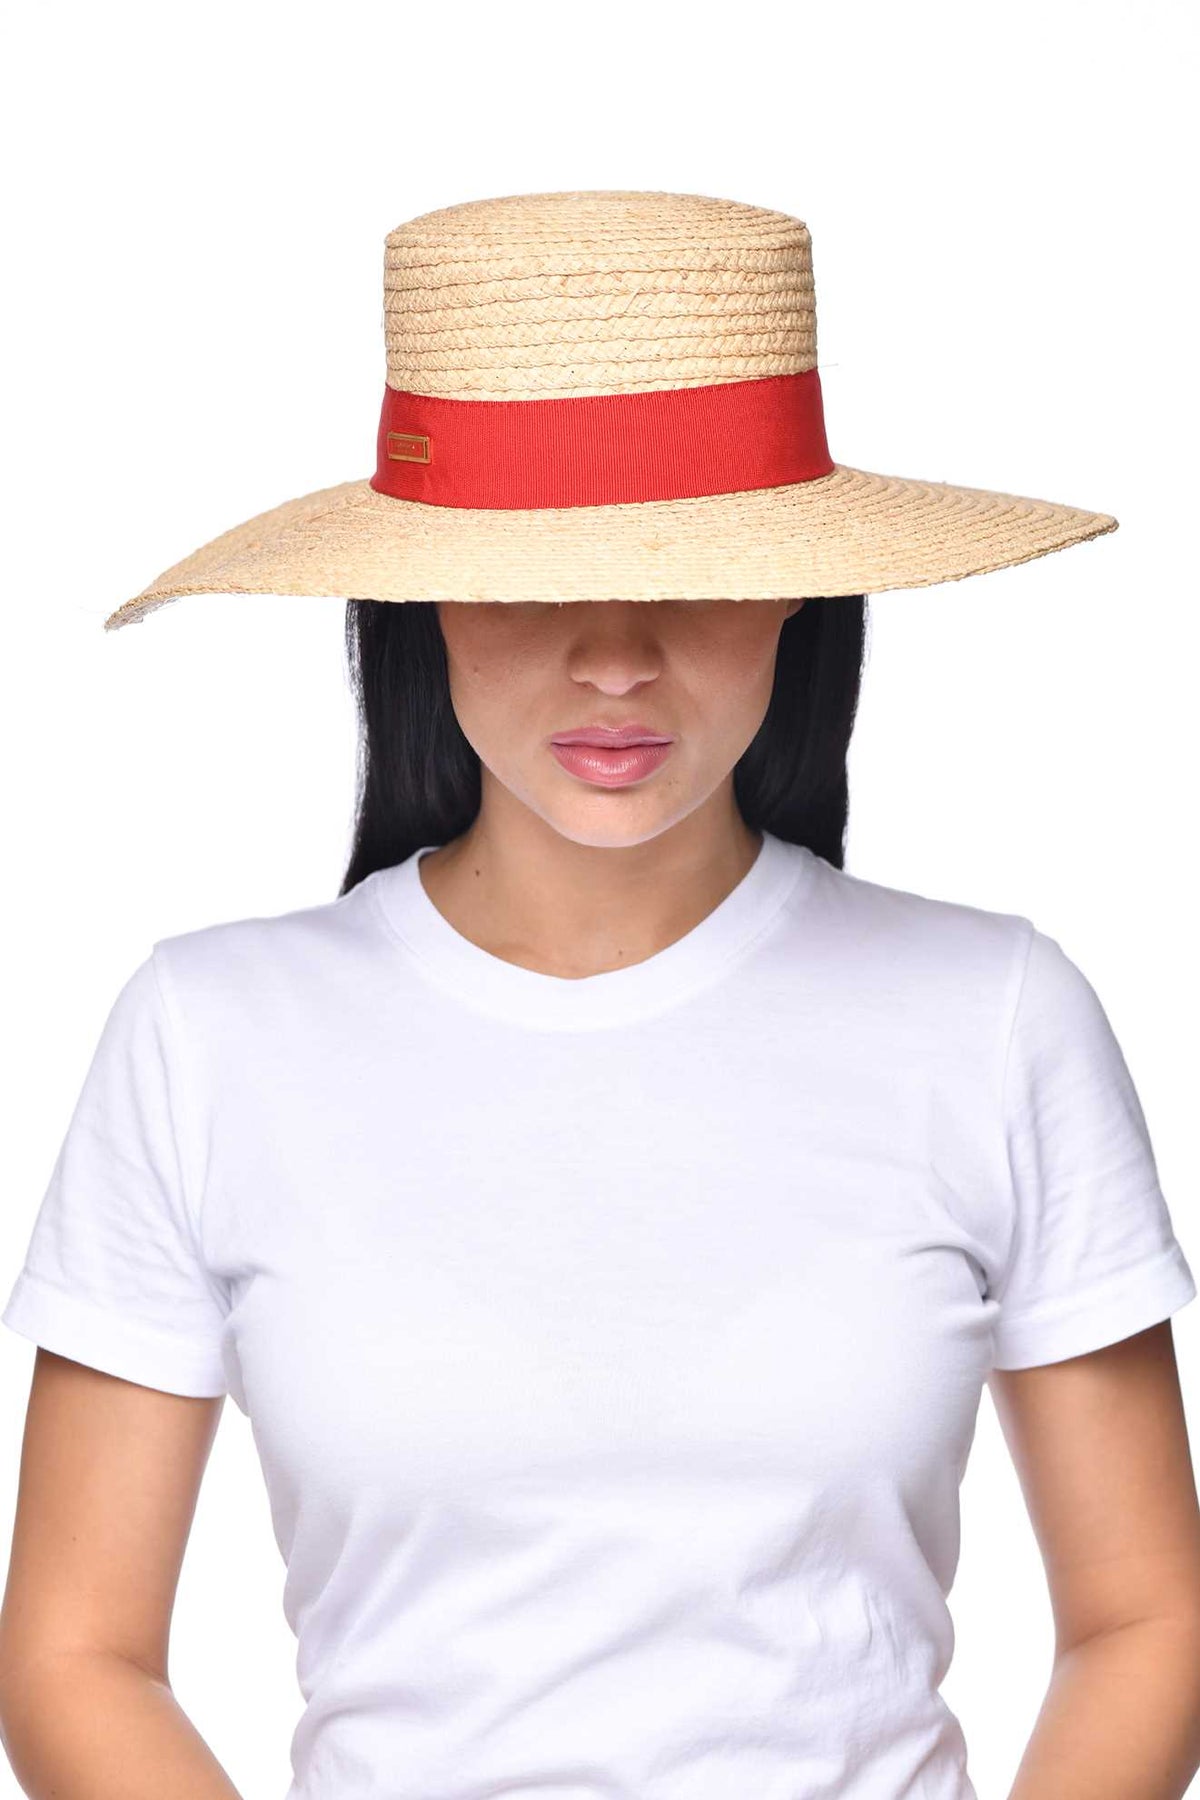 Handcrafted Mirtha sun protection hat in color red 